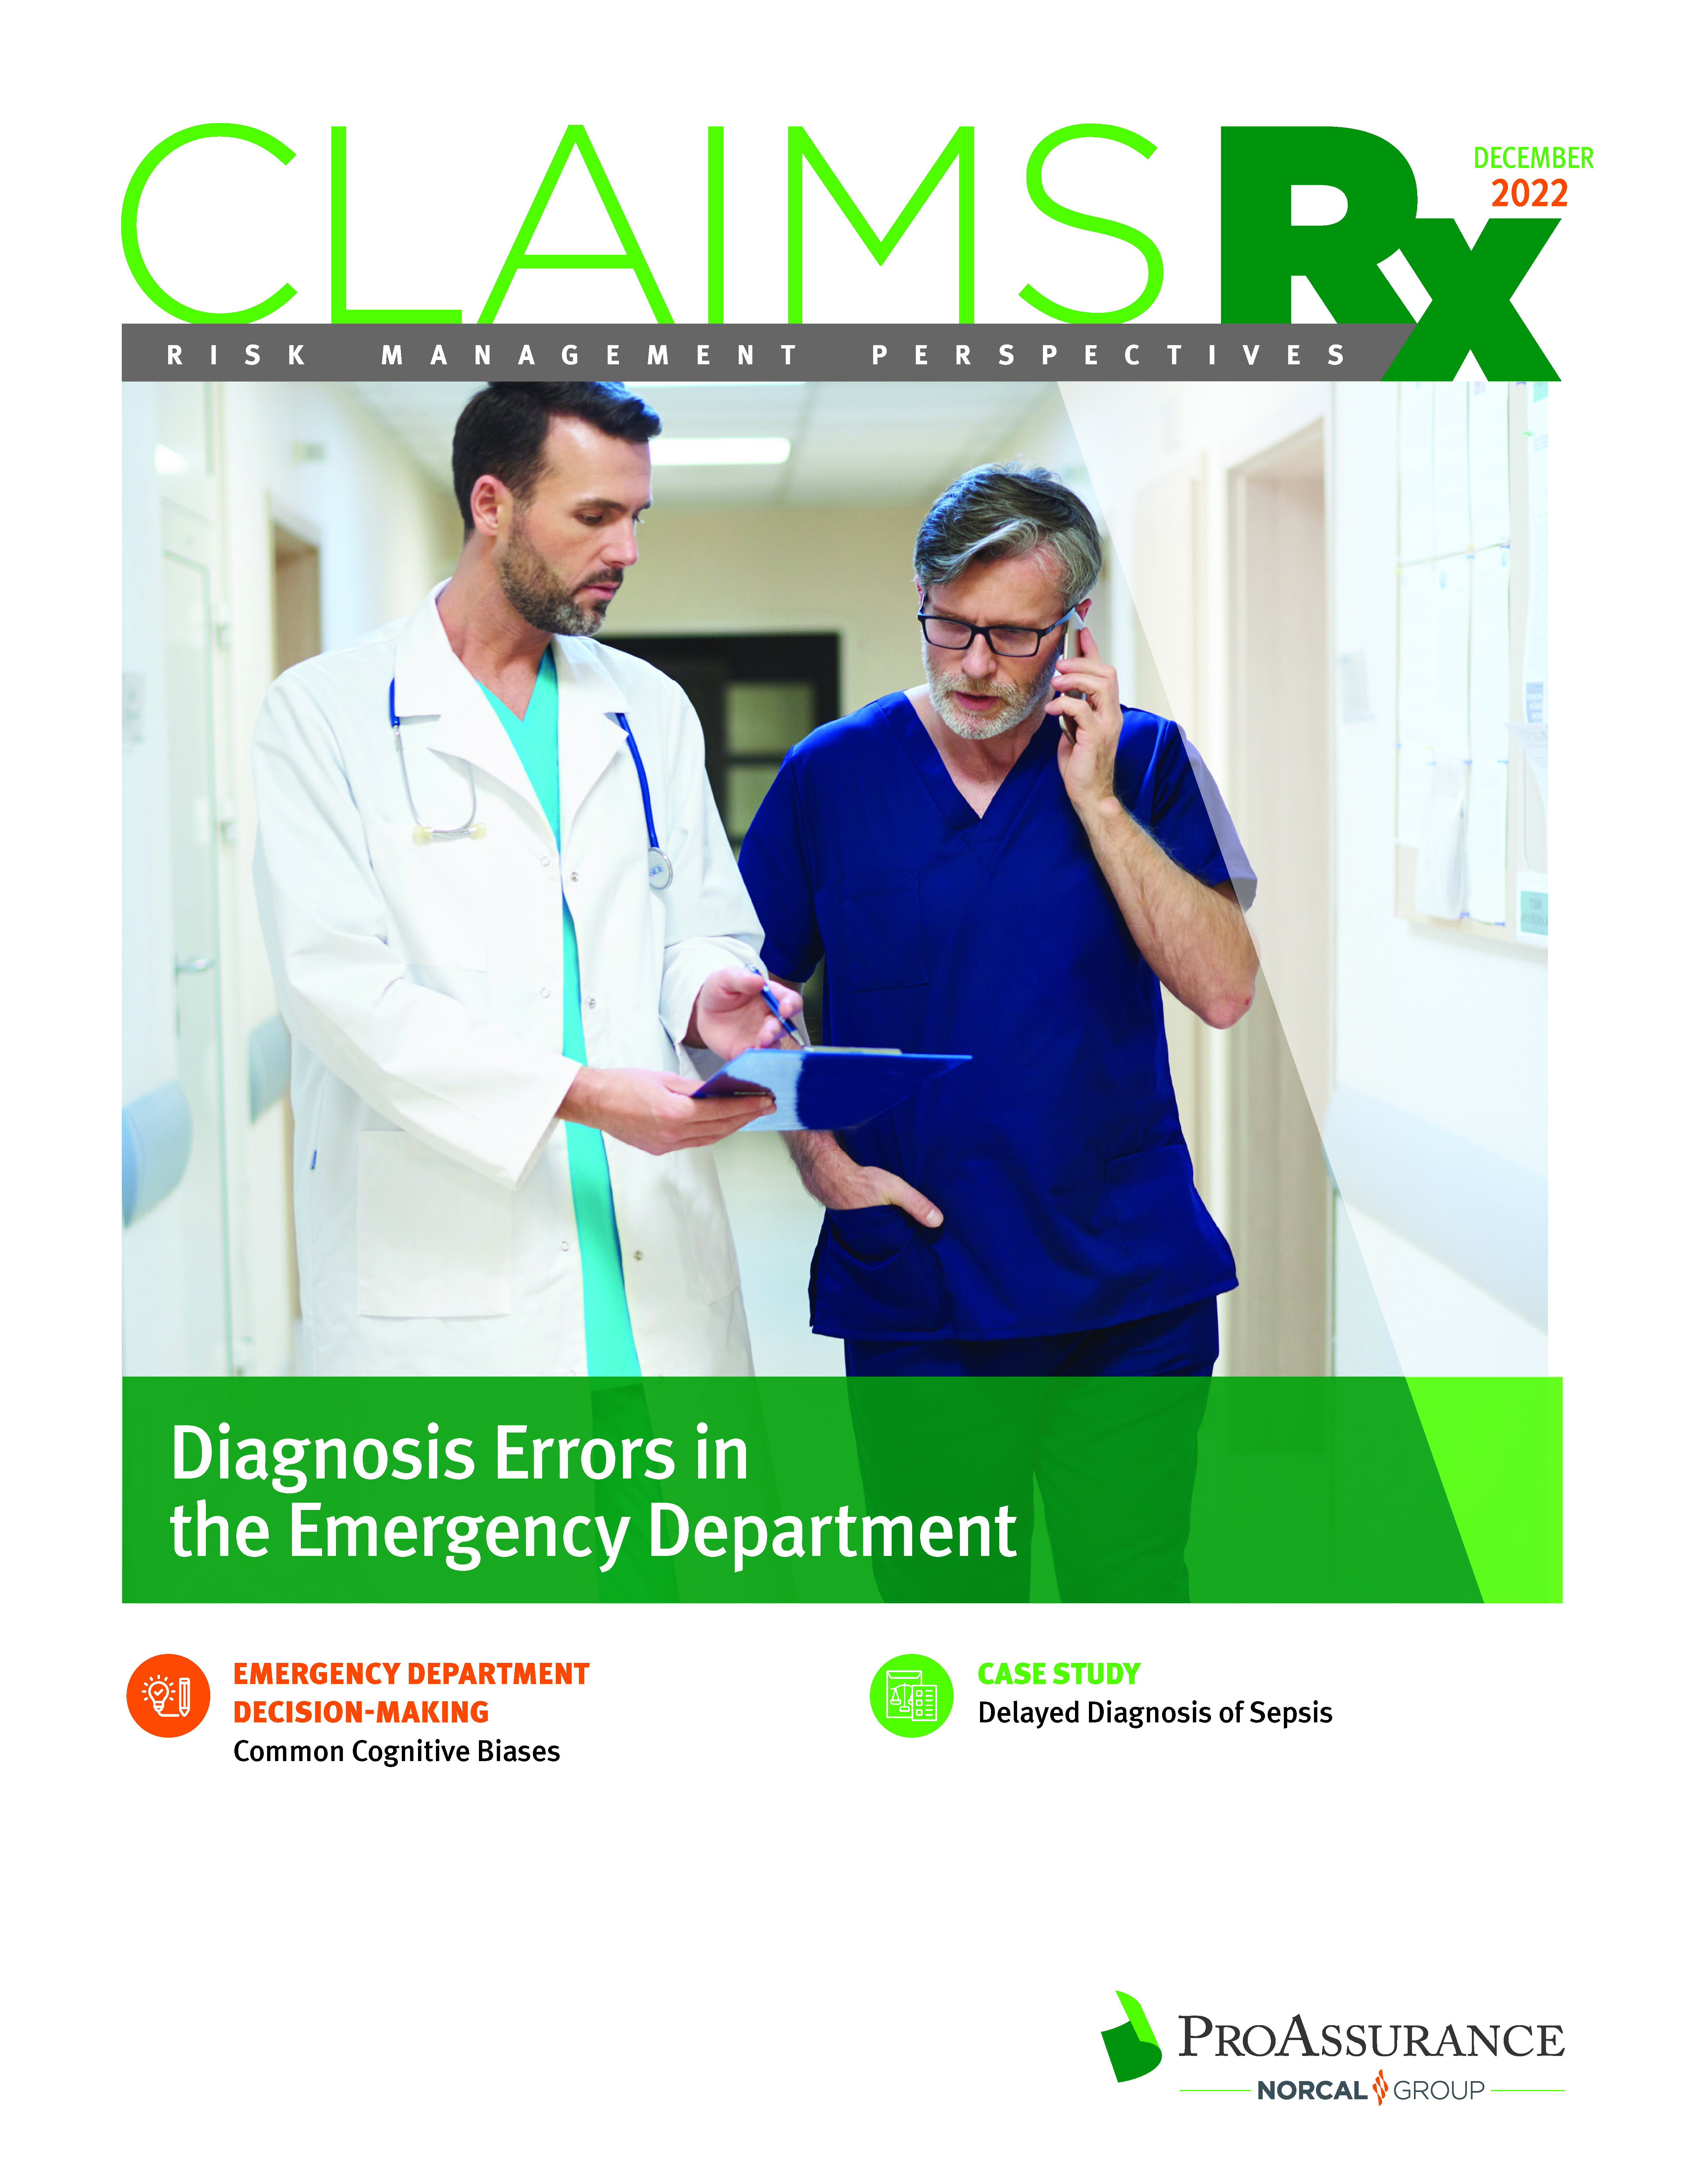 Diagnosis Errors in the Emergency Department